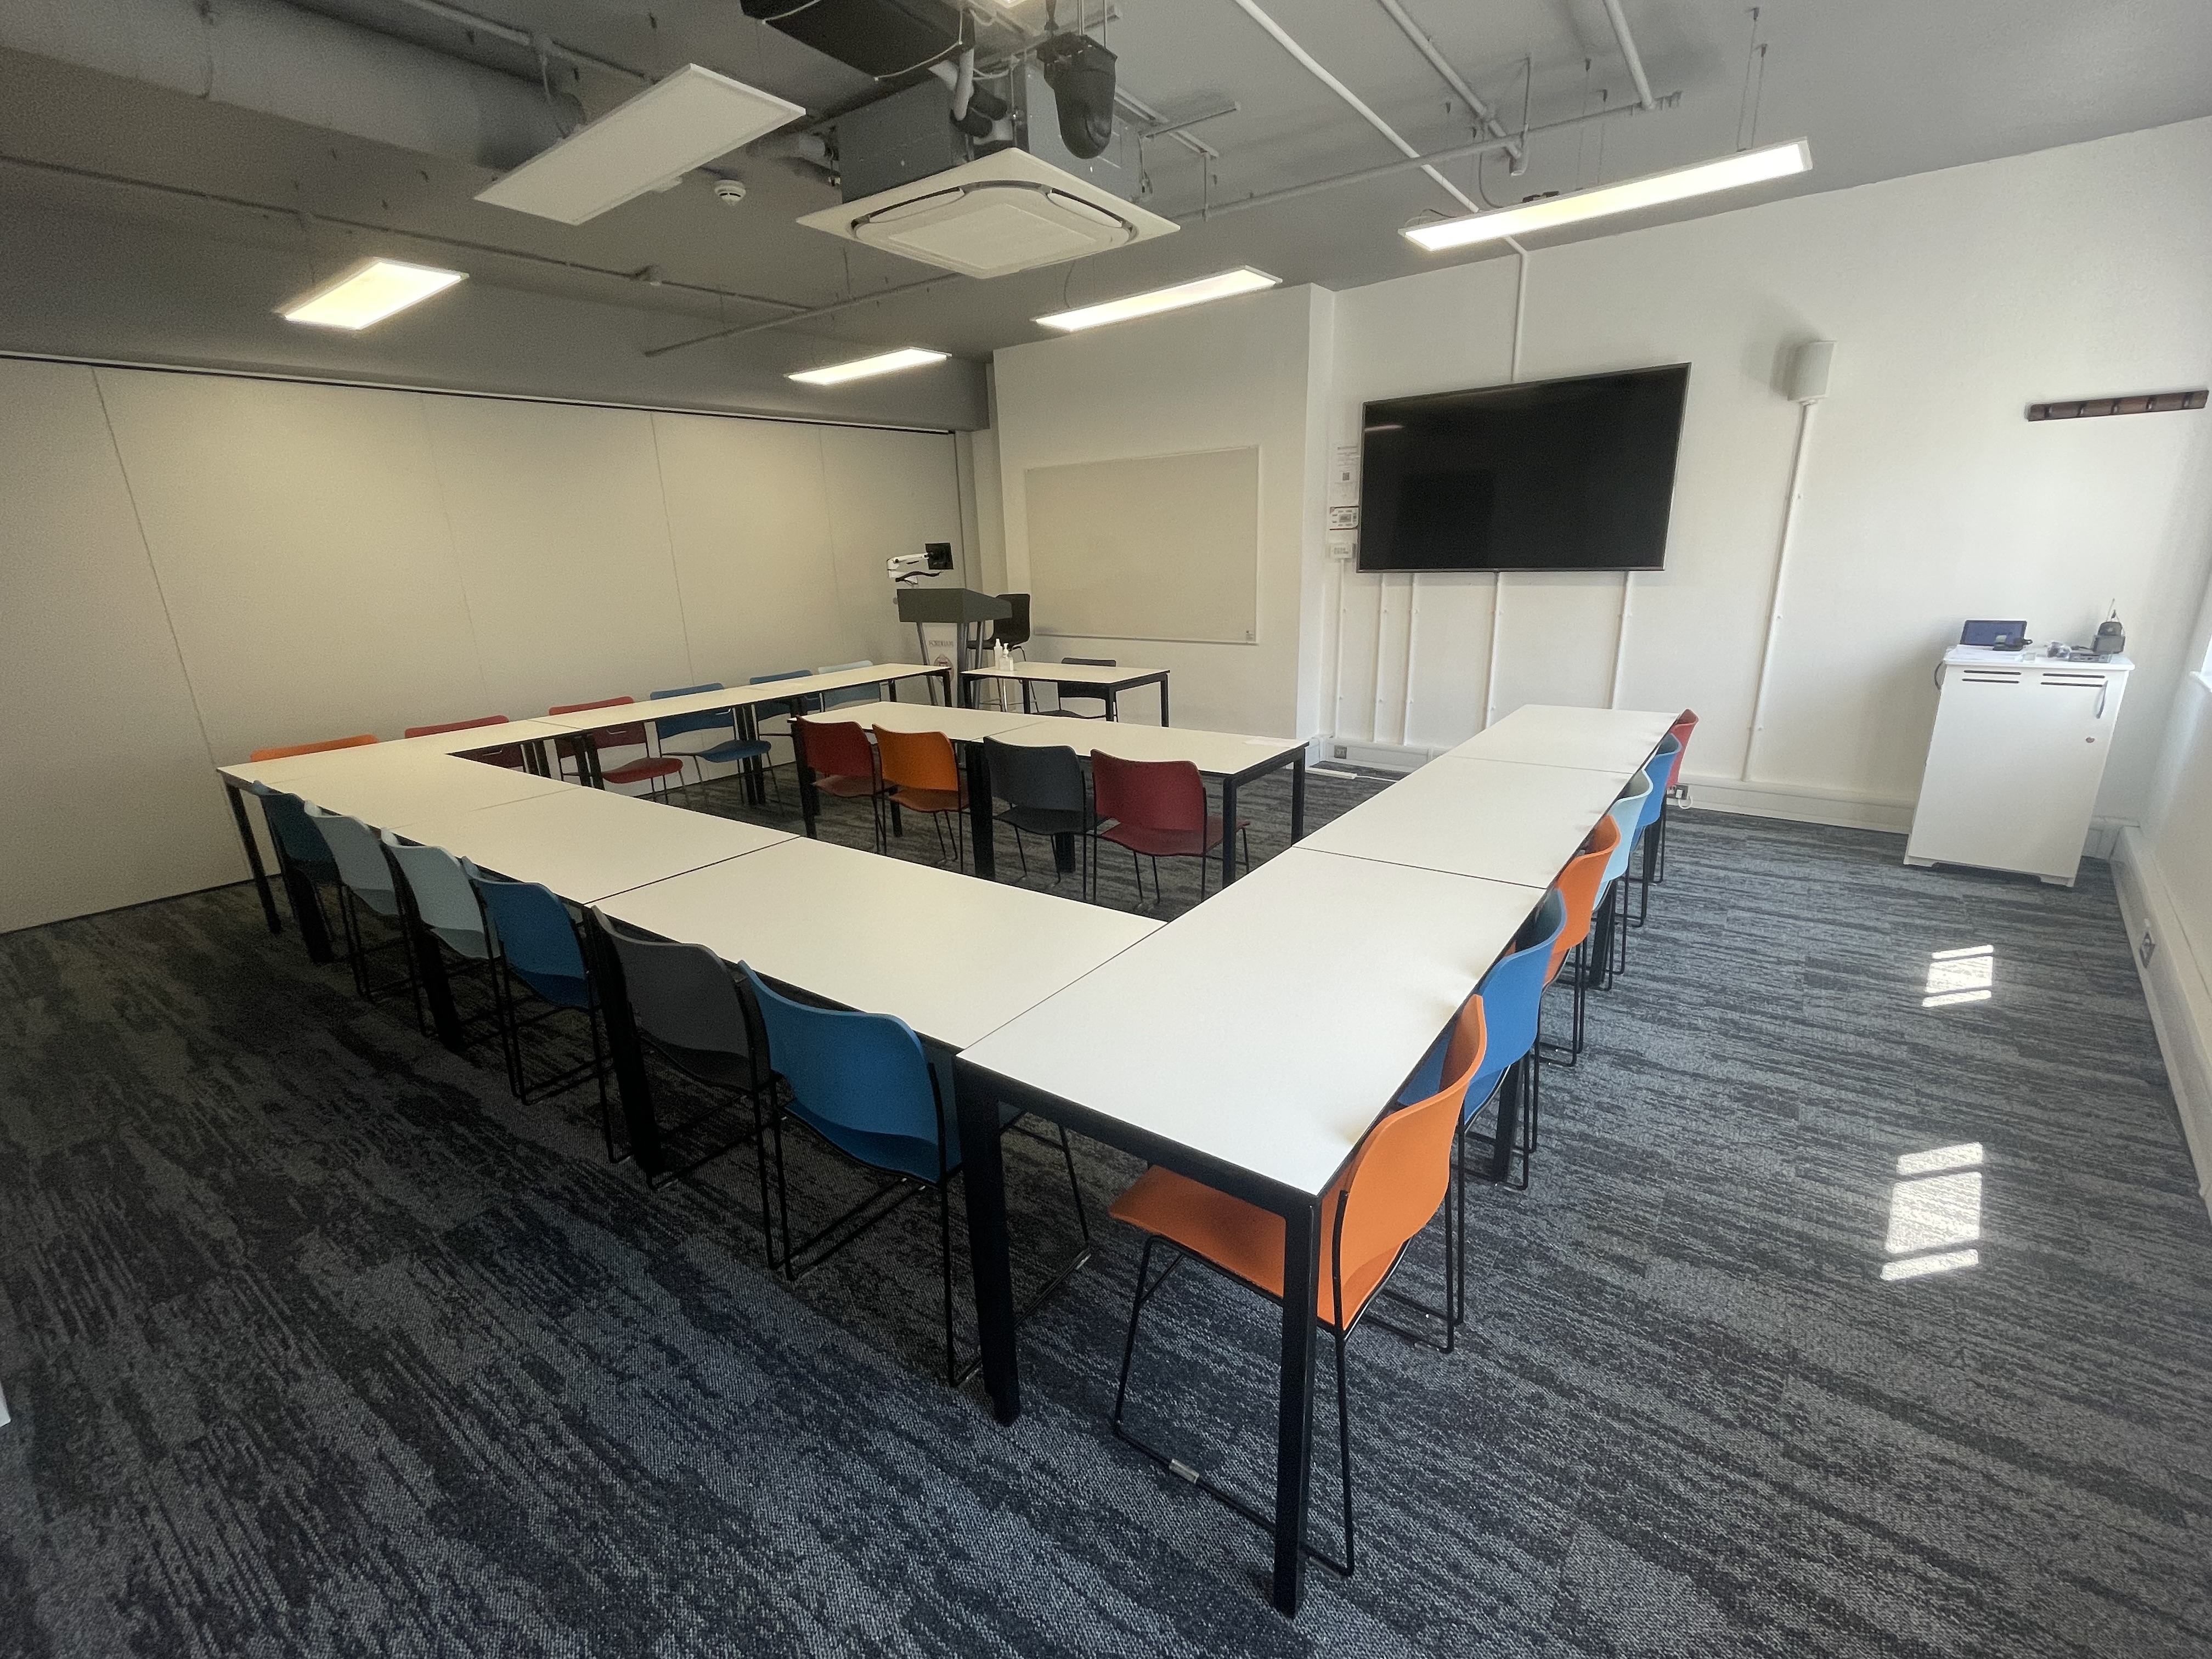 Room 302 - tables arranged as a cube with an table inset in a classroom